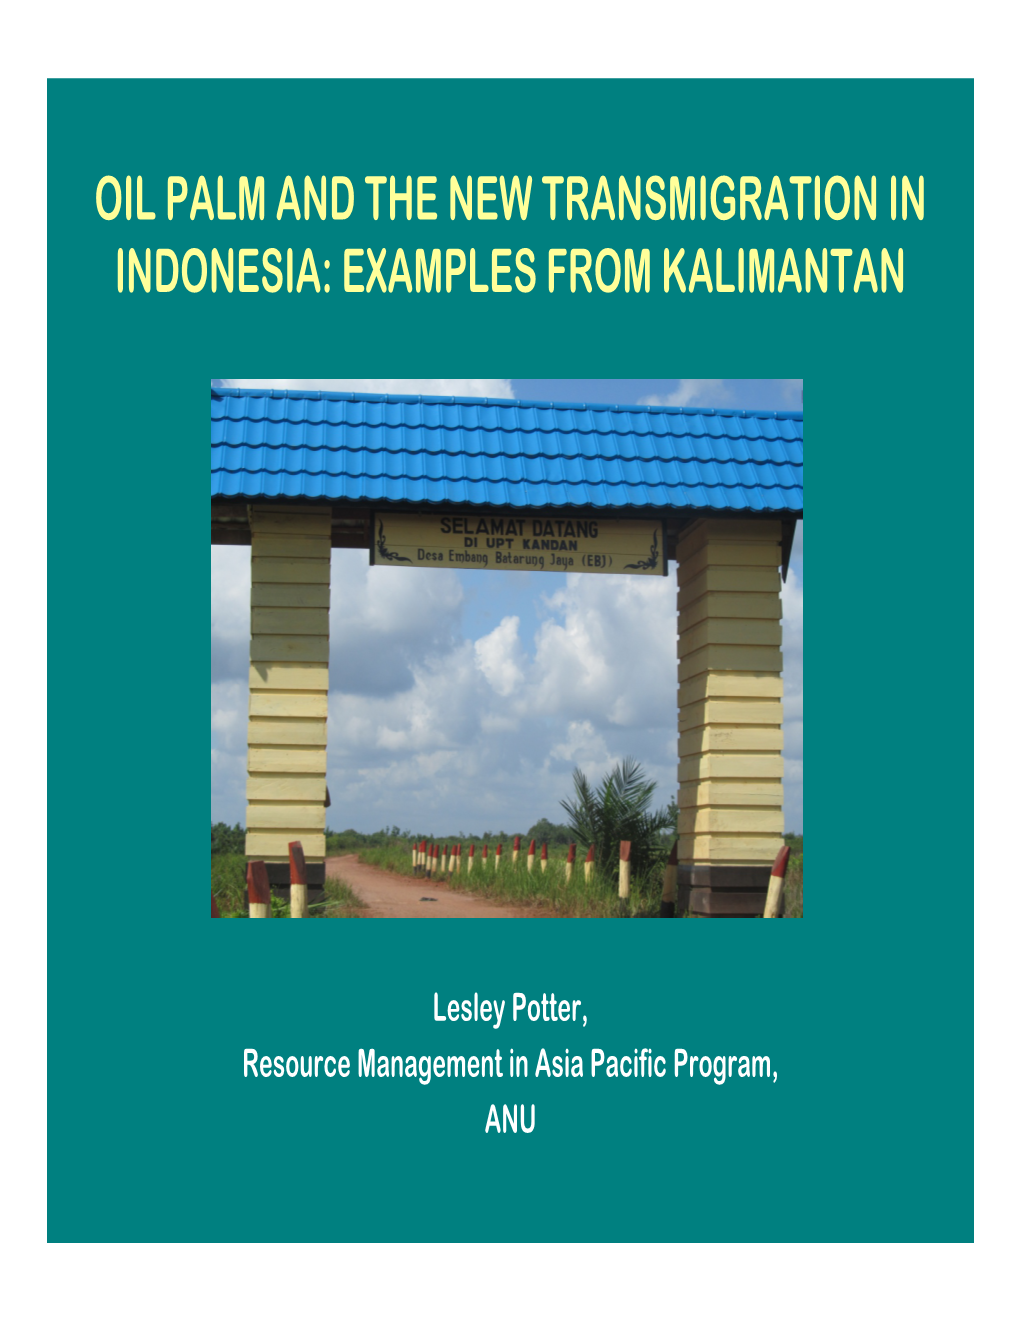 Oil Palm and the New Transmigration in Indonesia: Examples from Kalimantan